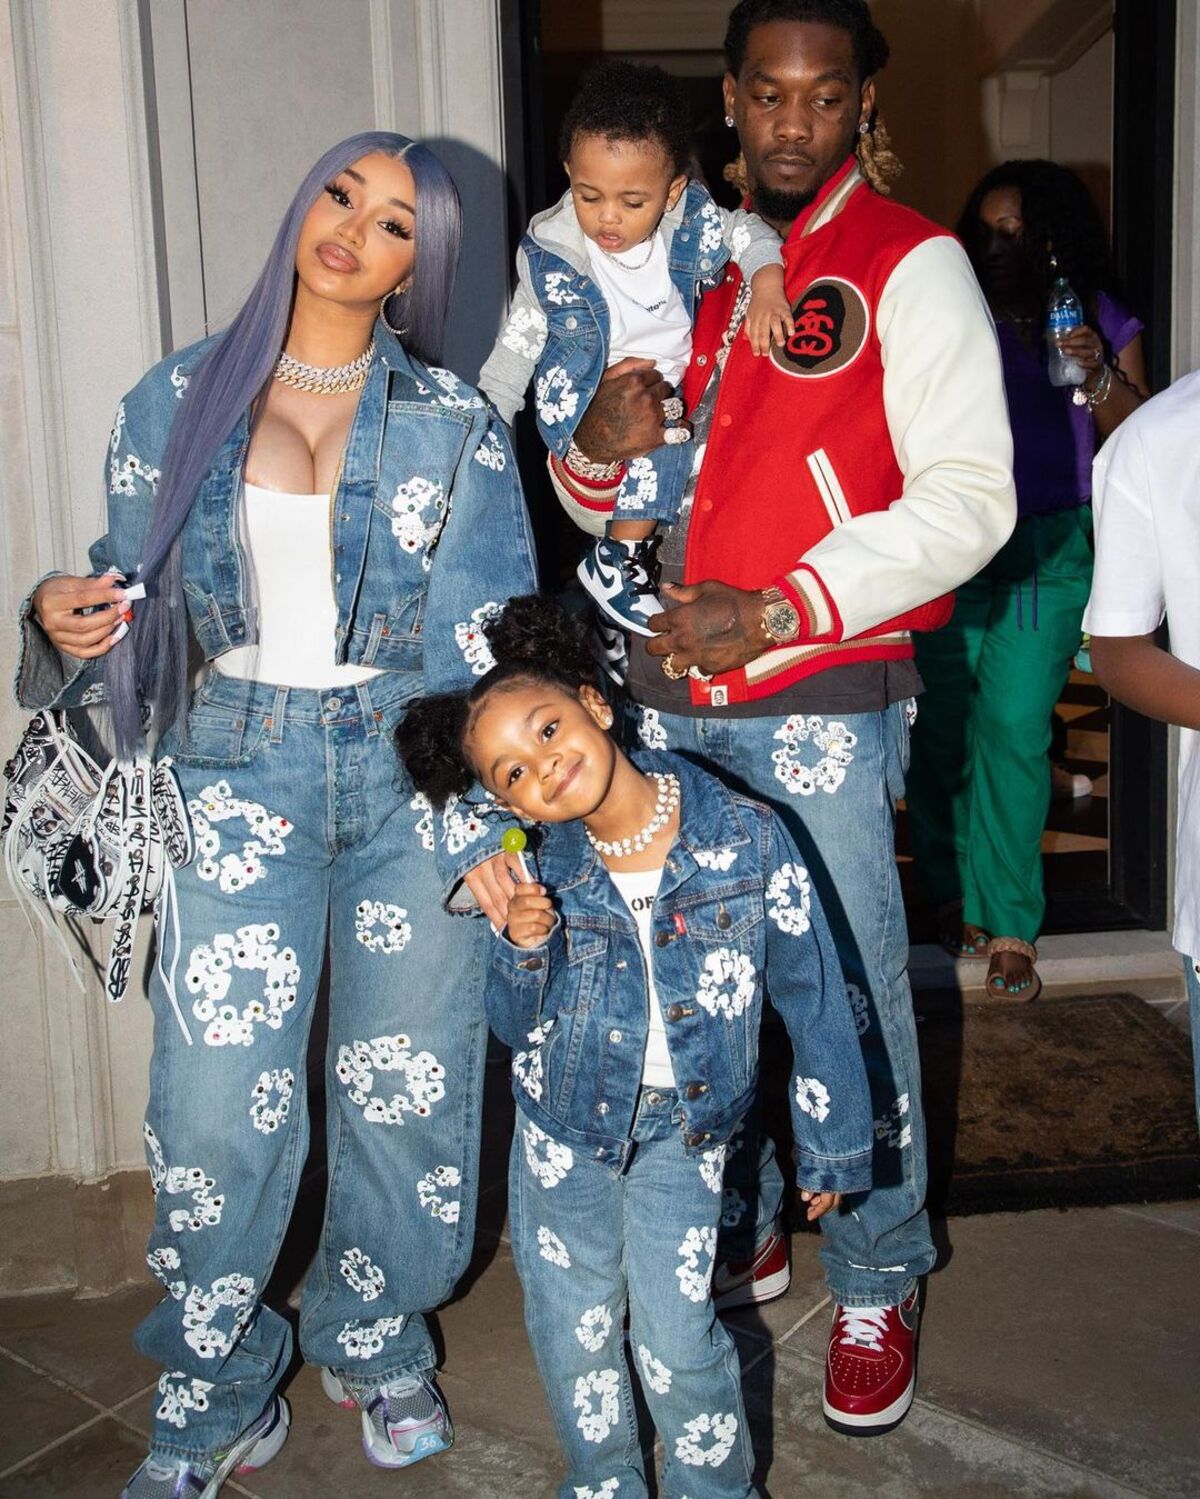 SPOTTED: Cardi B & Offset Pose for Family Flick Full Denim Tears Ensemble – PAUSE Online | Fashion, Street Style, Fashion News & Streetwear